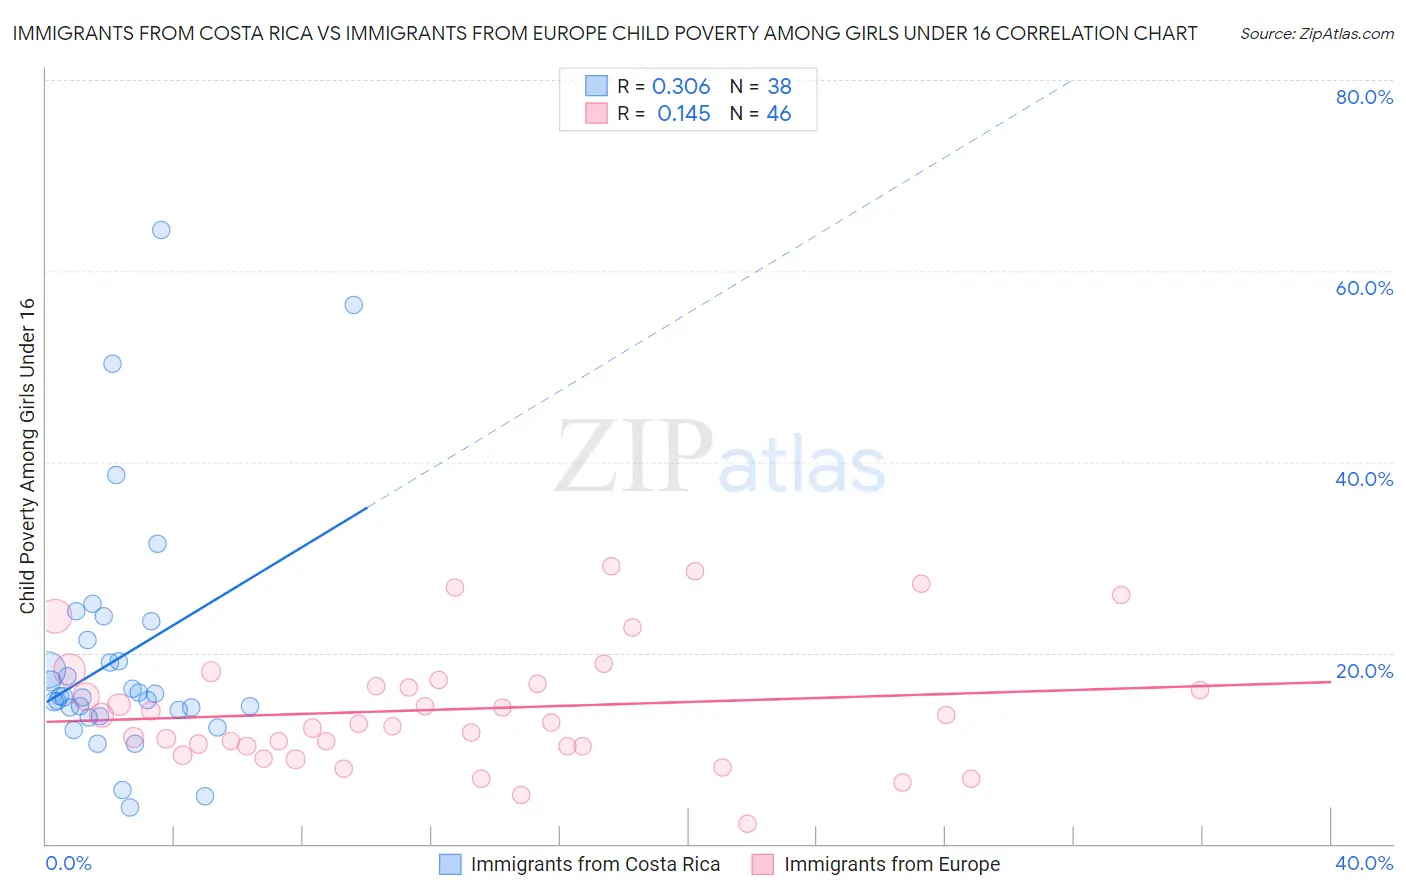 Immigrants from Costa Rica vs Immigrants from Europe Child Poverty Among Girls Under 16